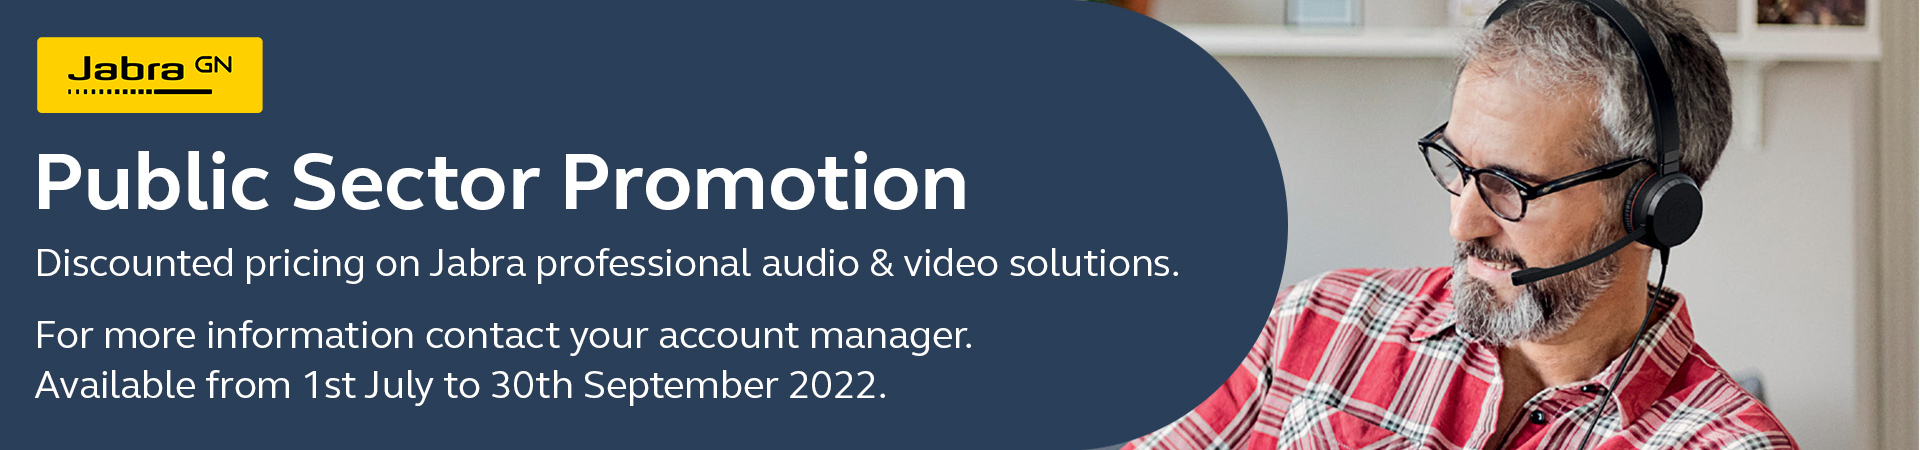 Jabra GN - Public Sector Promotion - Discounted pricing on Jabra professional audio & video solutions. For more information contact your account manager. Available from 1st July to 30th September 2022. 